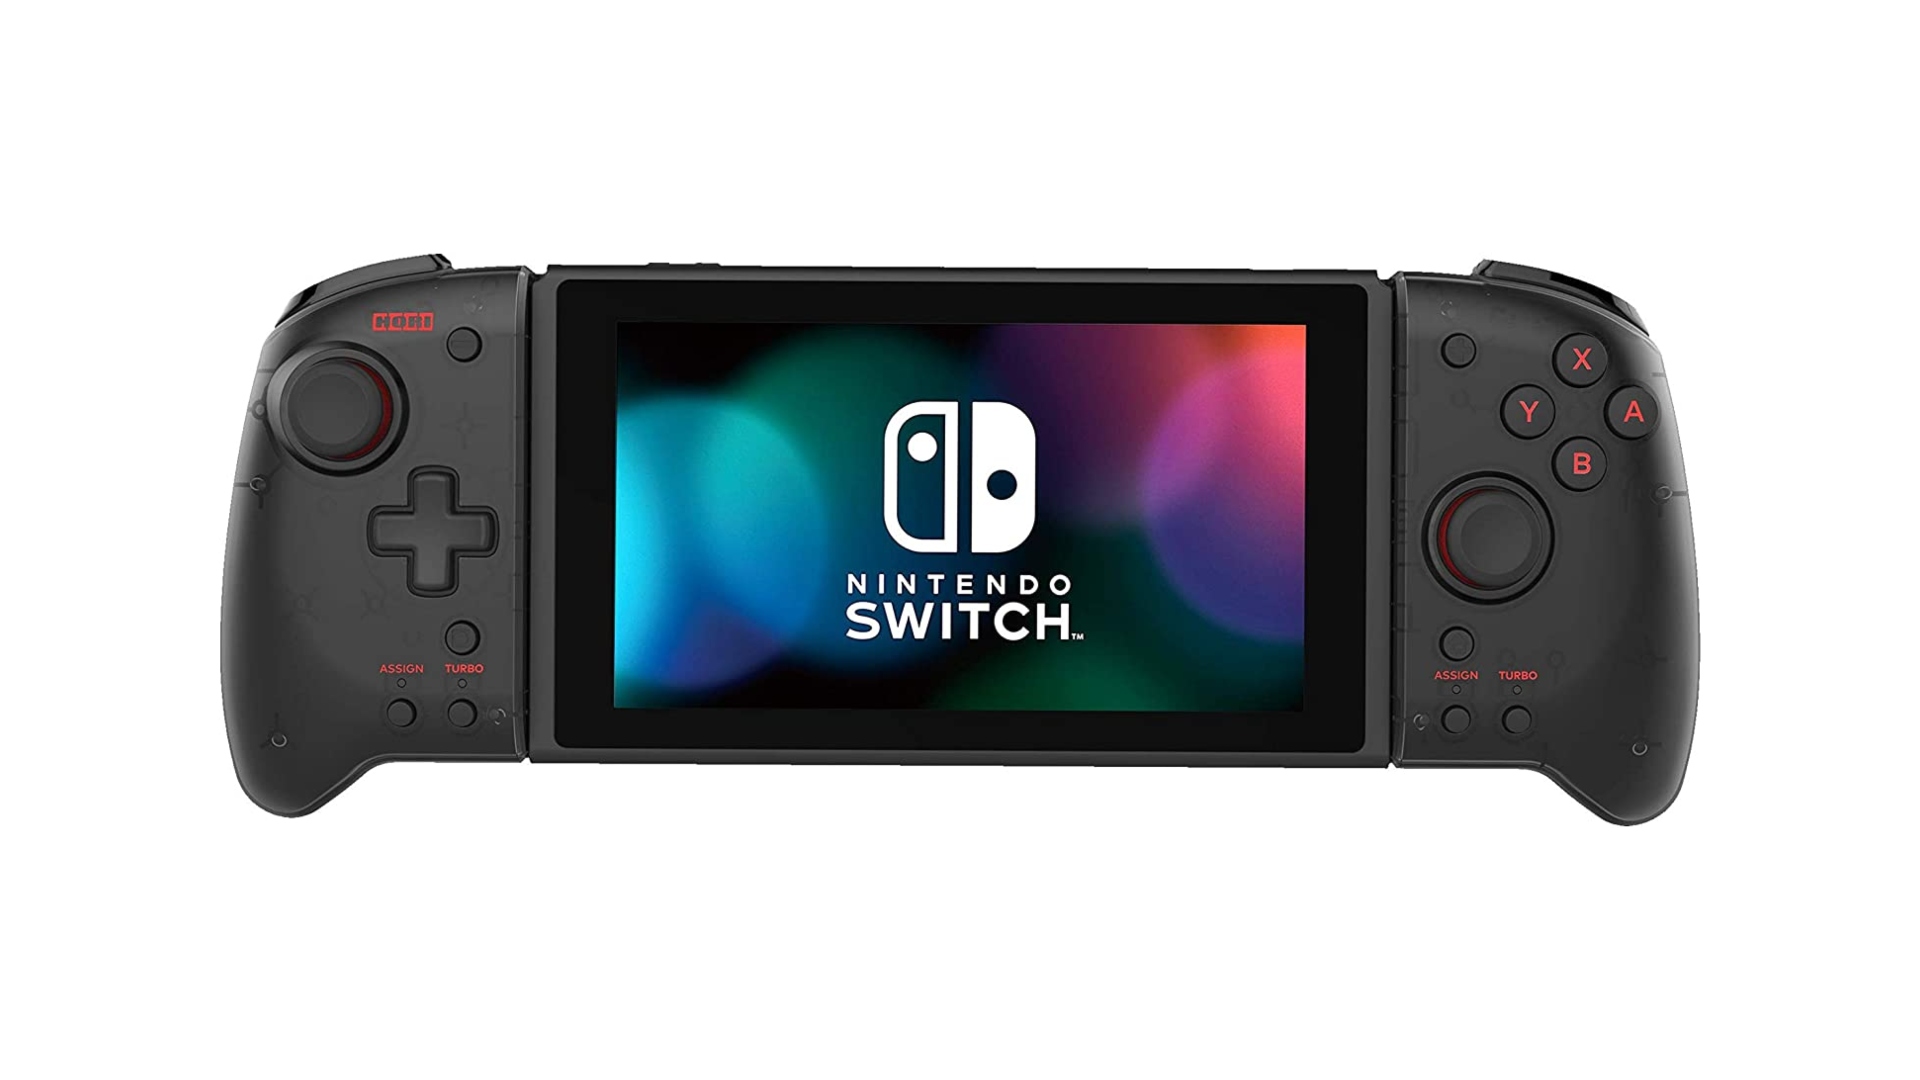 Nintendo Switch controller drifting? Try the Hori Split Pad Pro, pictured. Image shows a controller resembling two large joy-cons.